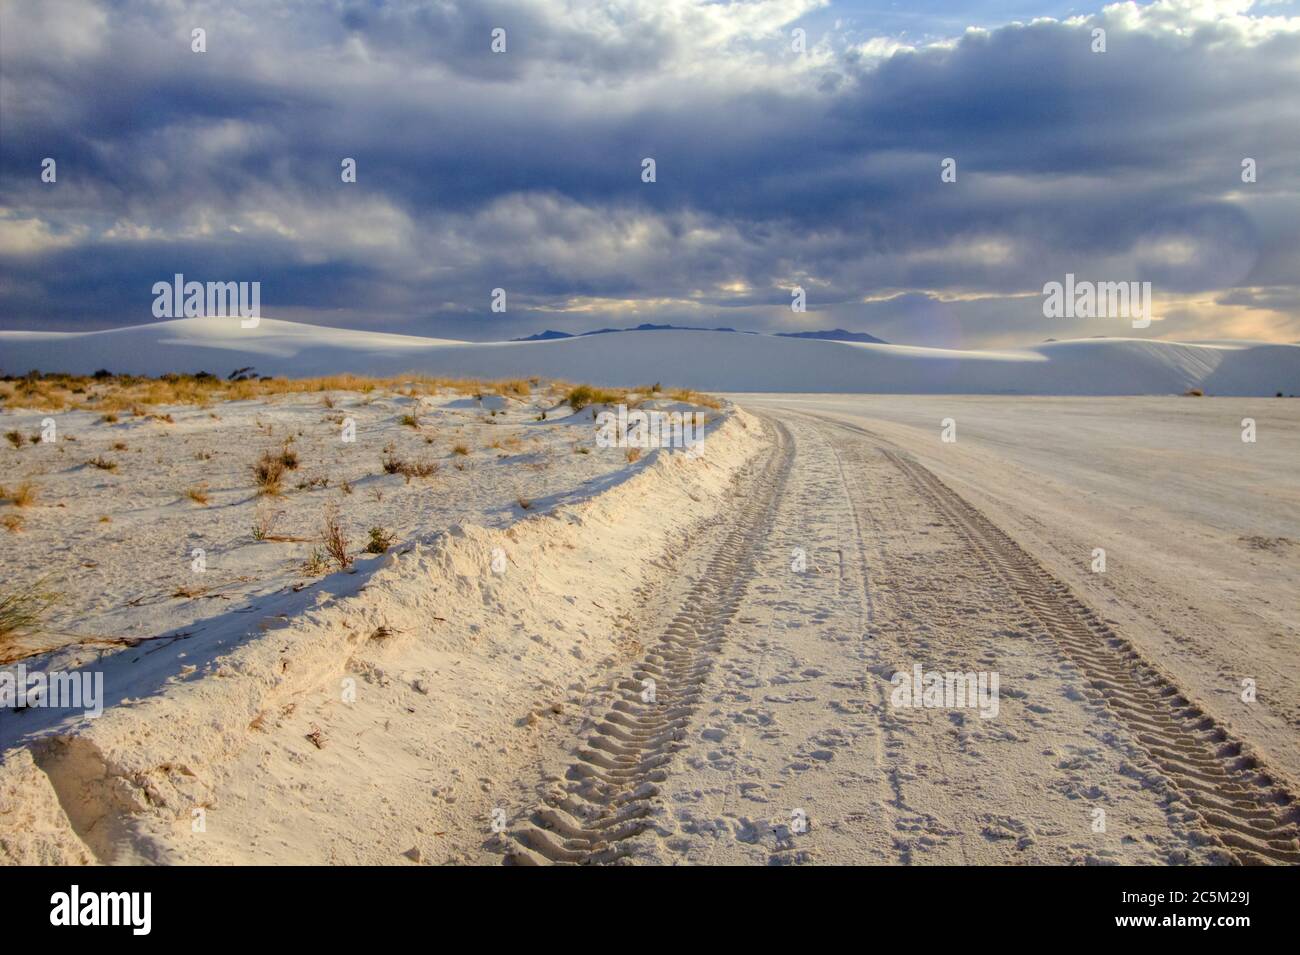 Tire tracks on a remote dirt road through the desert of the White Sands National Monument in Alamogordo, New Mexico. Stock Photo